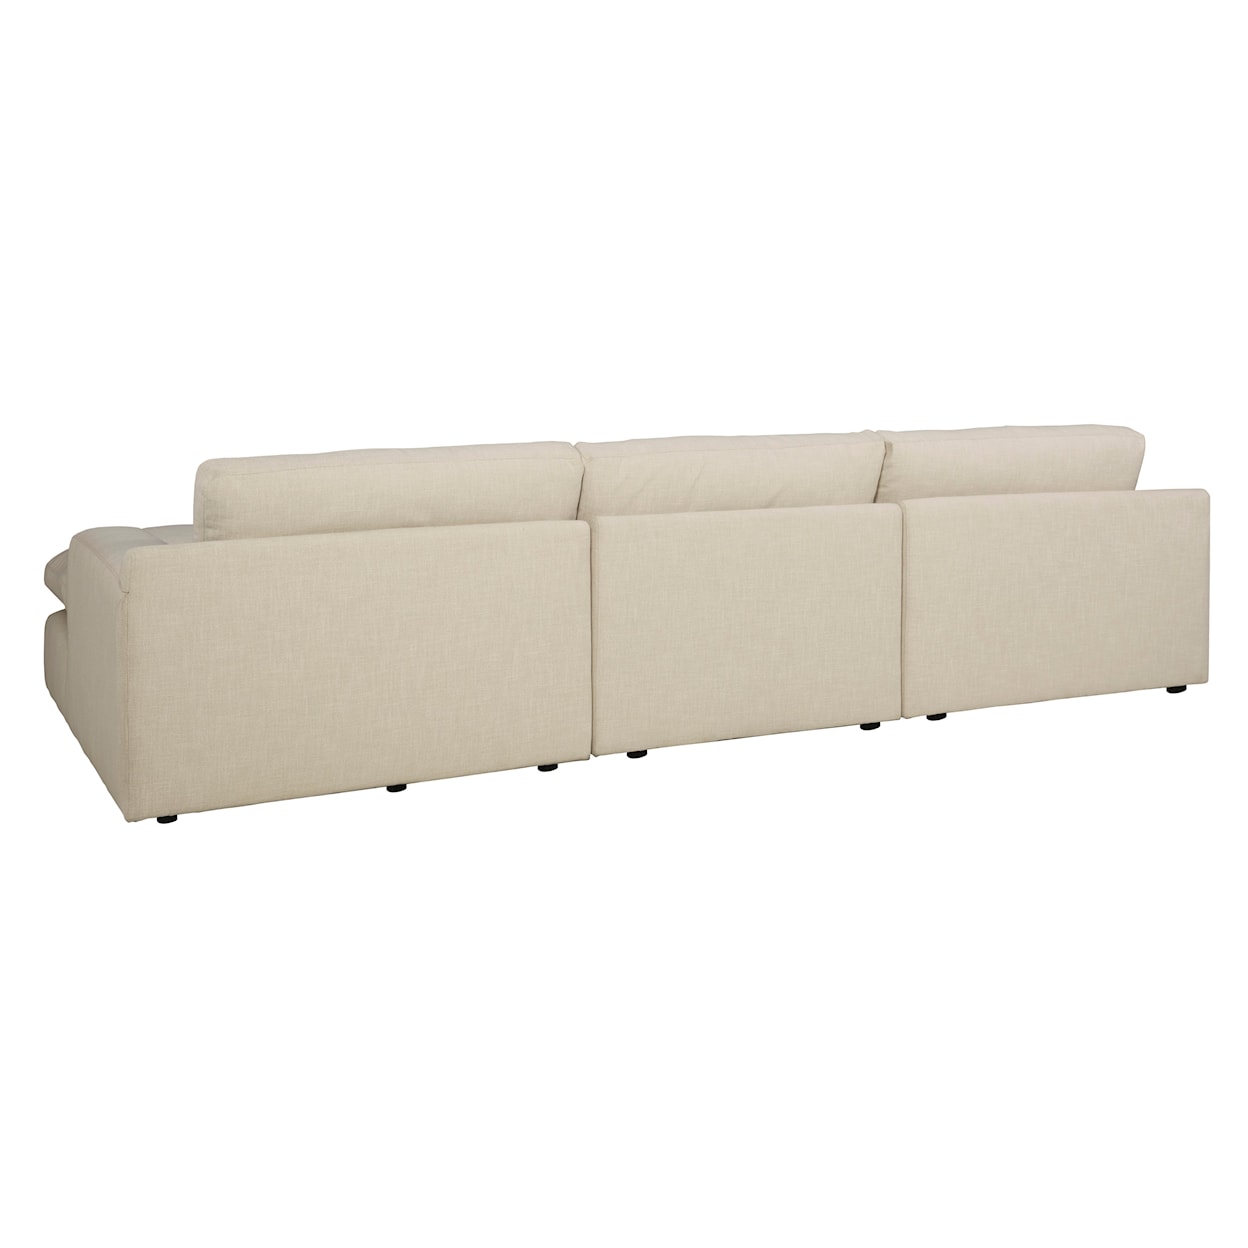 Benchcraft Alto 3-Piece Modular Sectional with Chaise